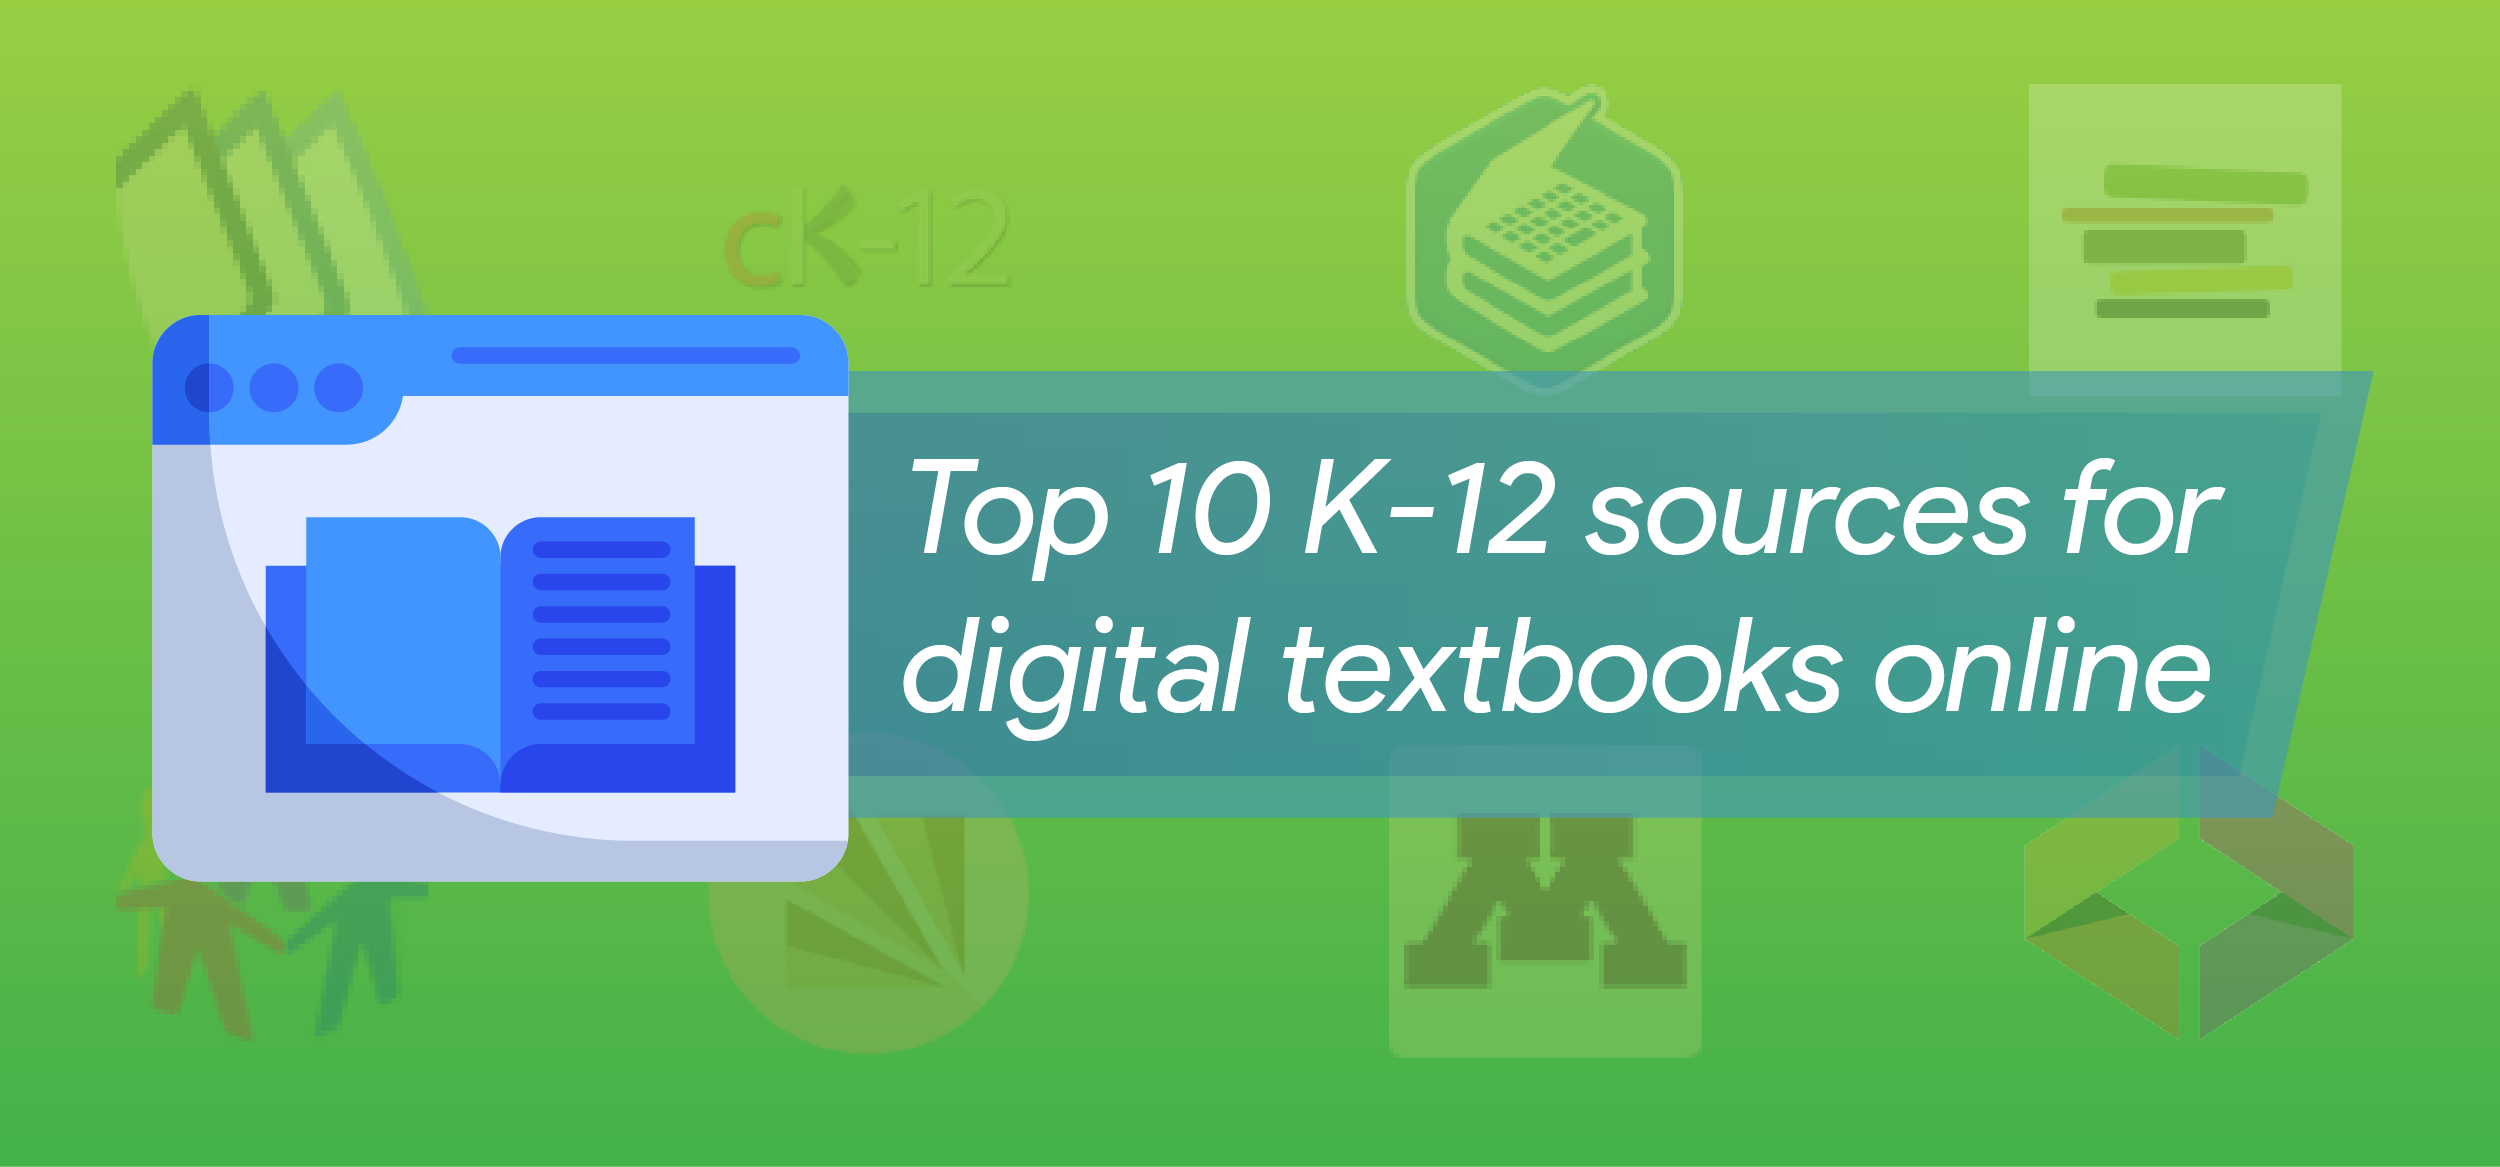 10 of the best K-12 sources for digital textbooks online